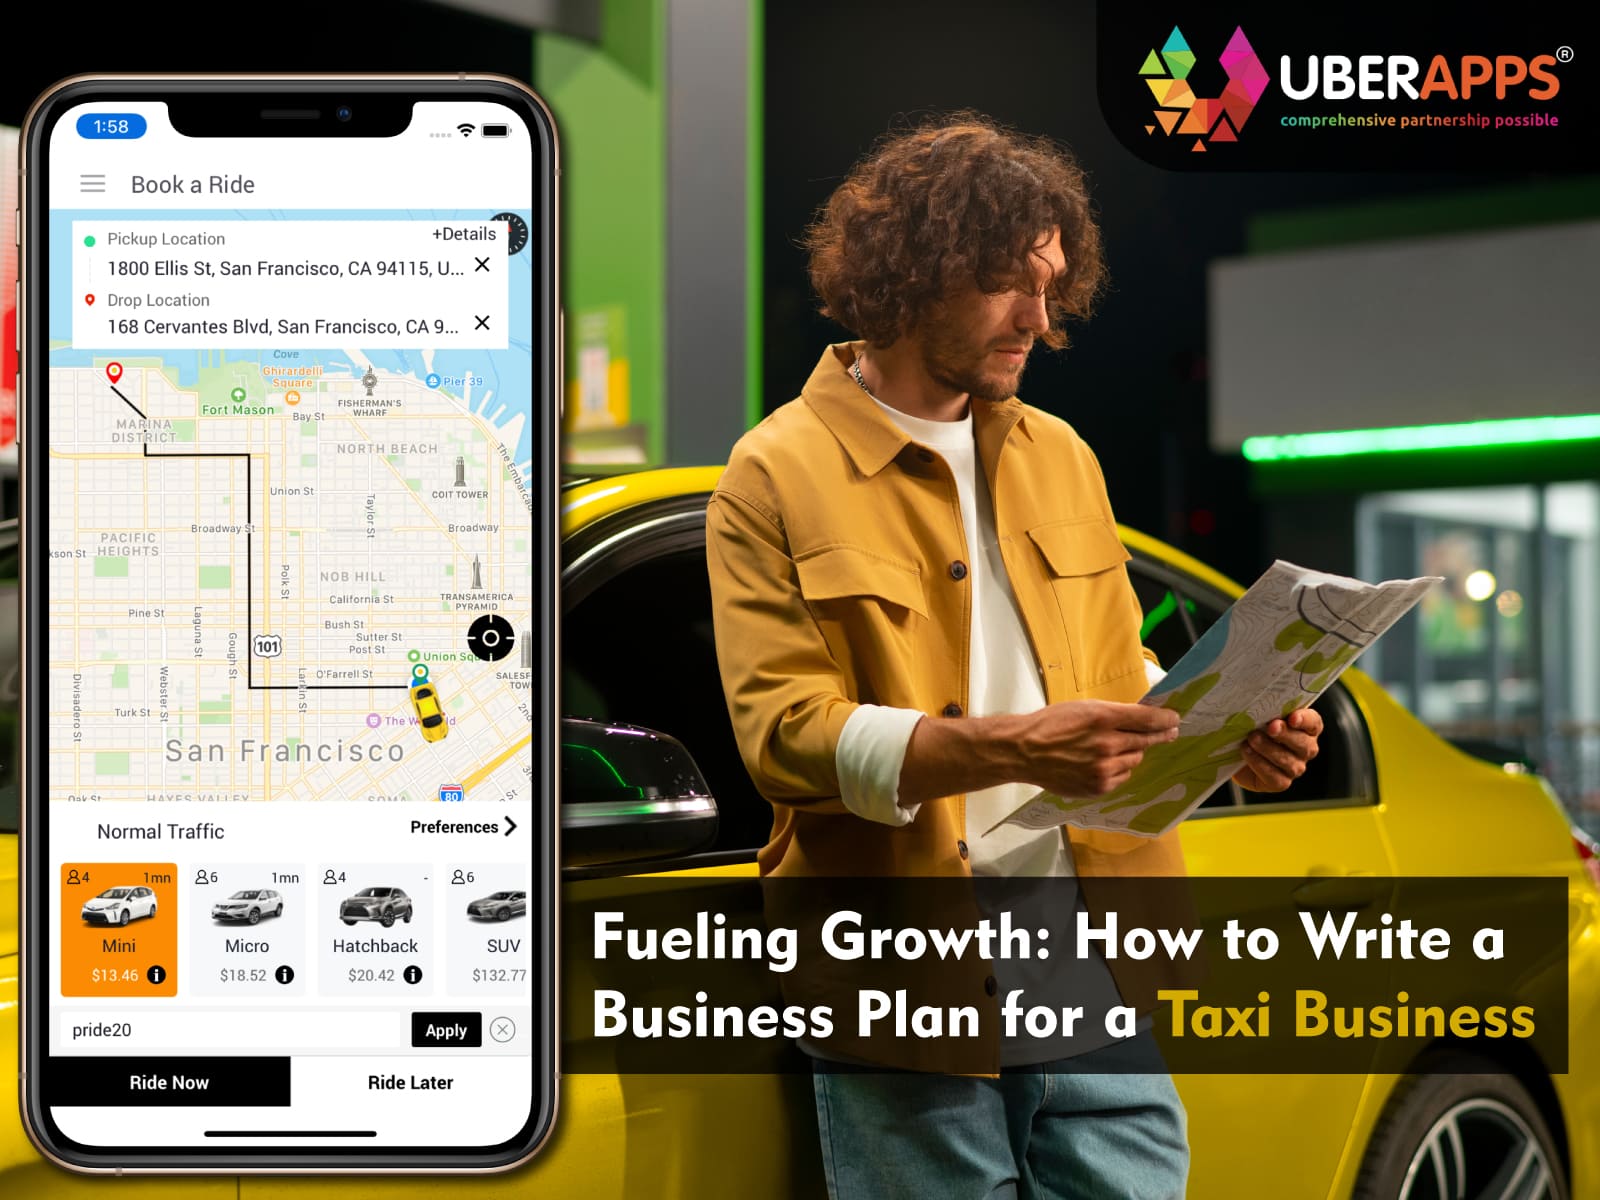 Fueling Growth: How to Write a Business Plan for a Taxi Business